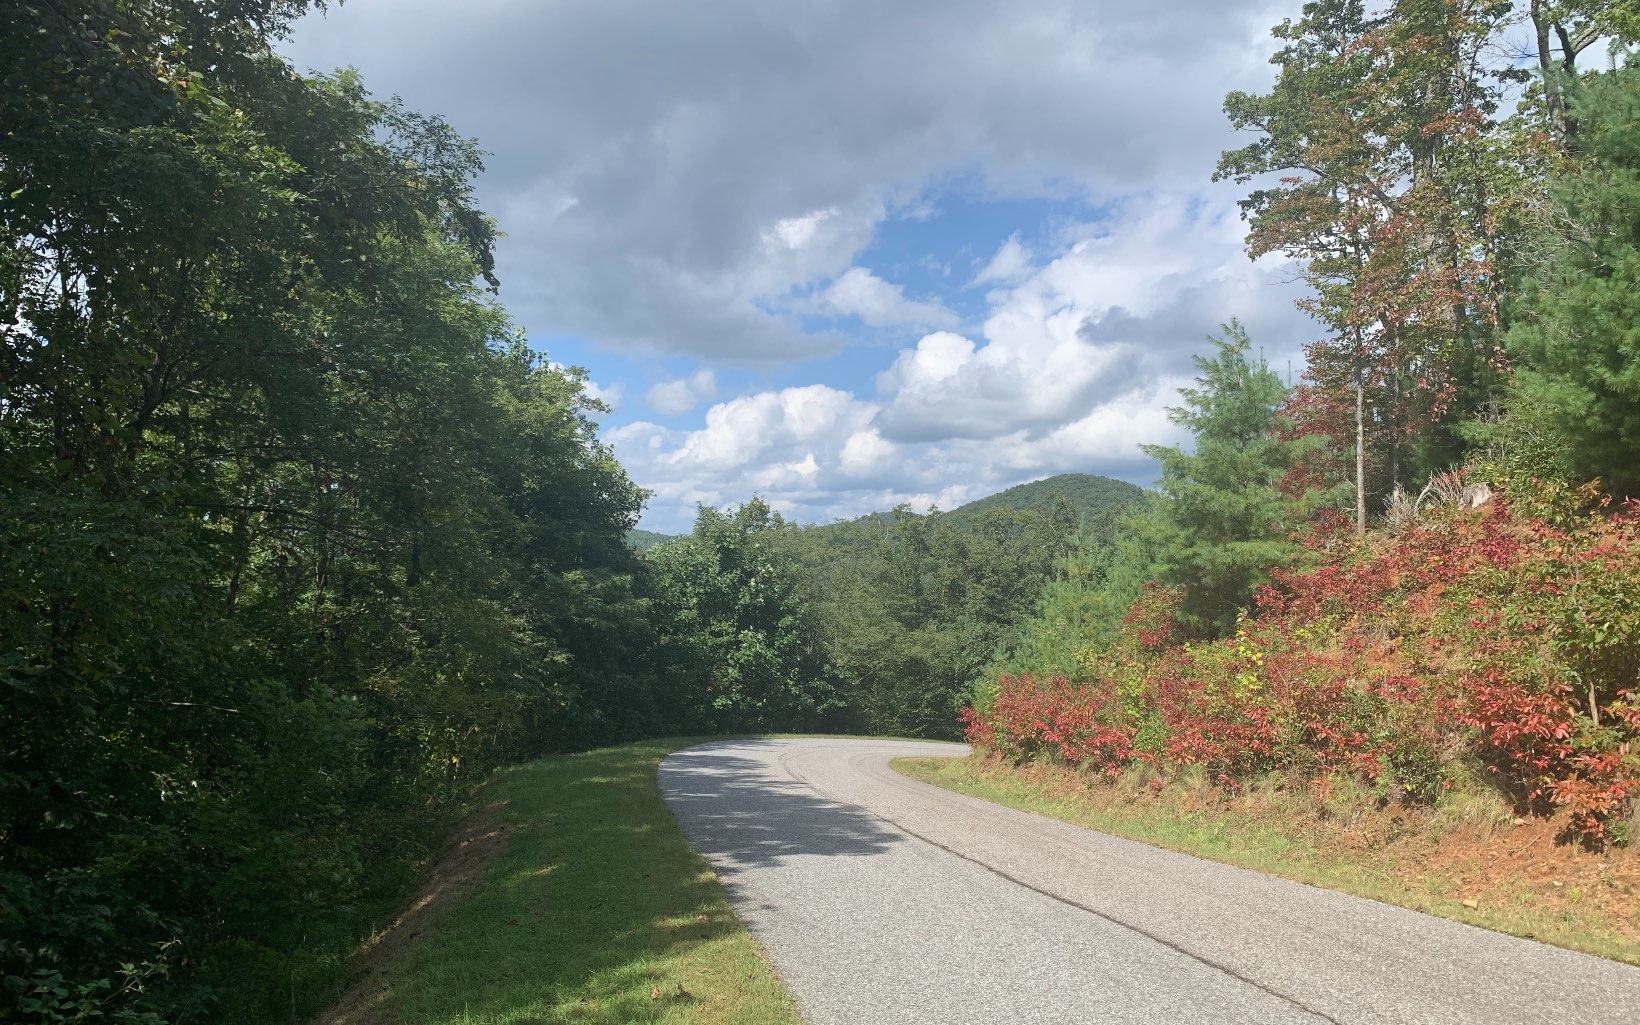 Wow! 6 plus acres with a year round mountain view! Located in the beautiful Owltown area of Union County, all paved access, public water, underground power, high-speed fiber optics, come enjoy this upscale mountain community!